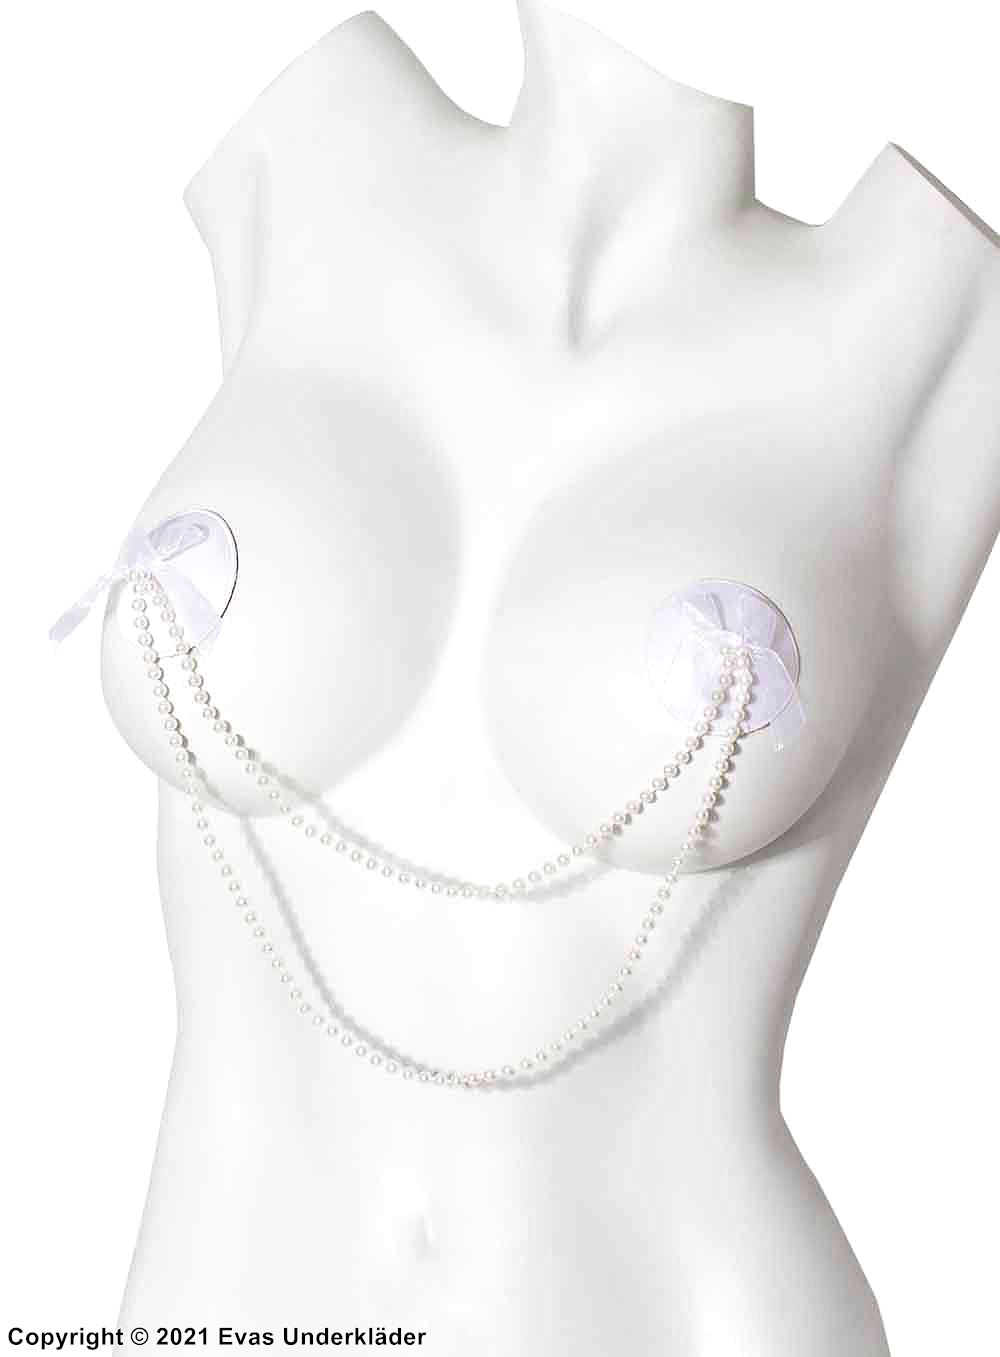 Self-adhesive nipple cover/patch, bows, pearls